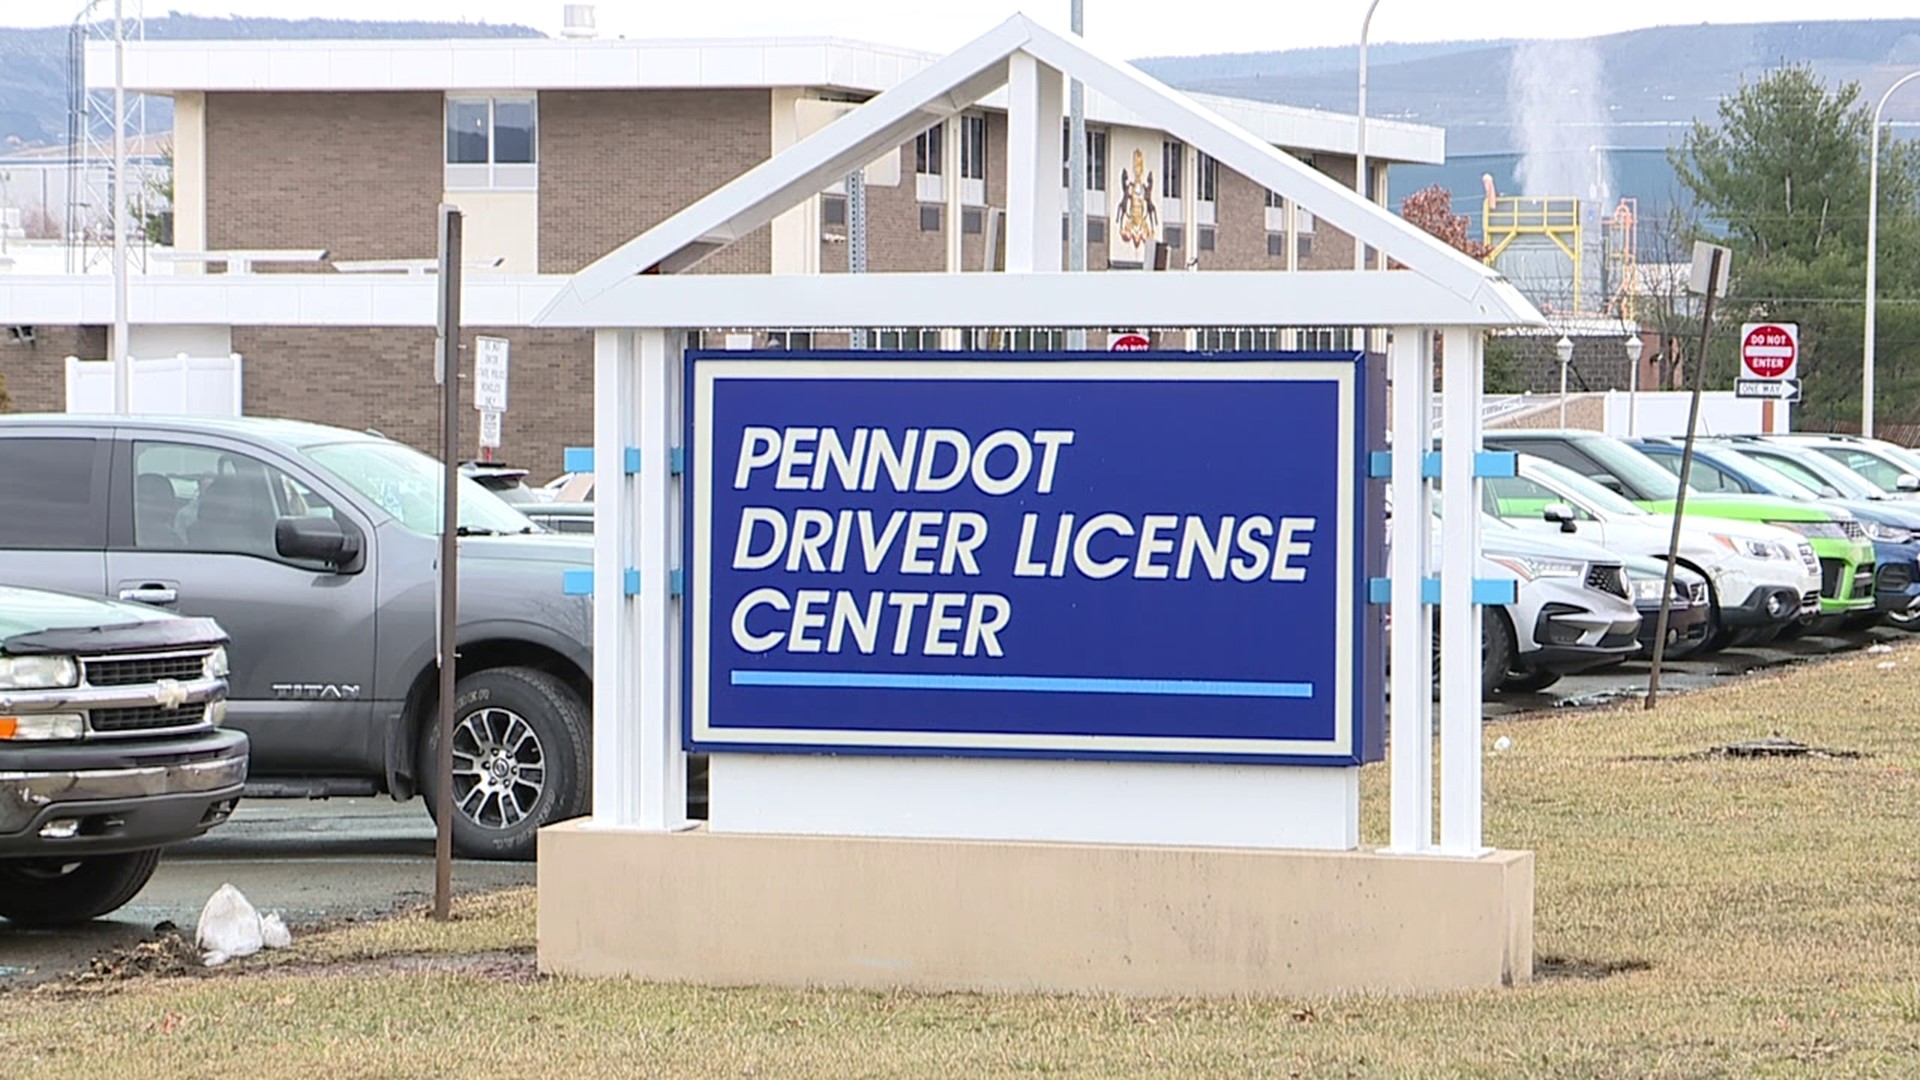 According to PennDOT, several driver's licensing services statewide will be unavailable Saturday due to Verizon network maintenance.